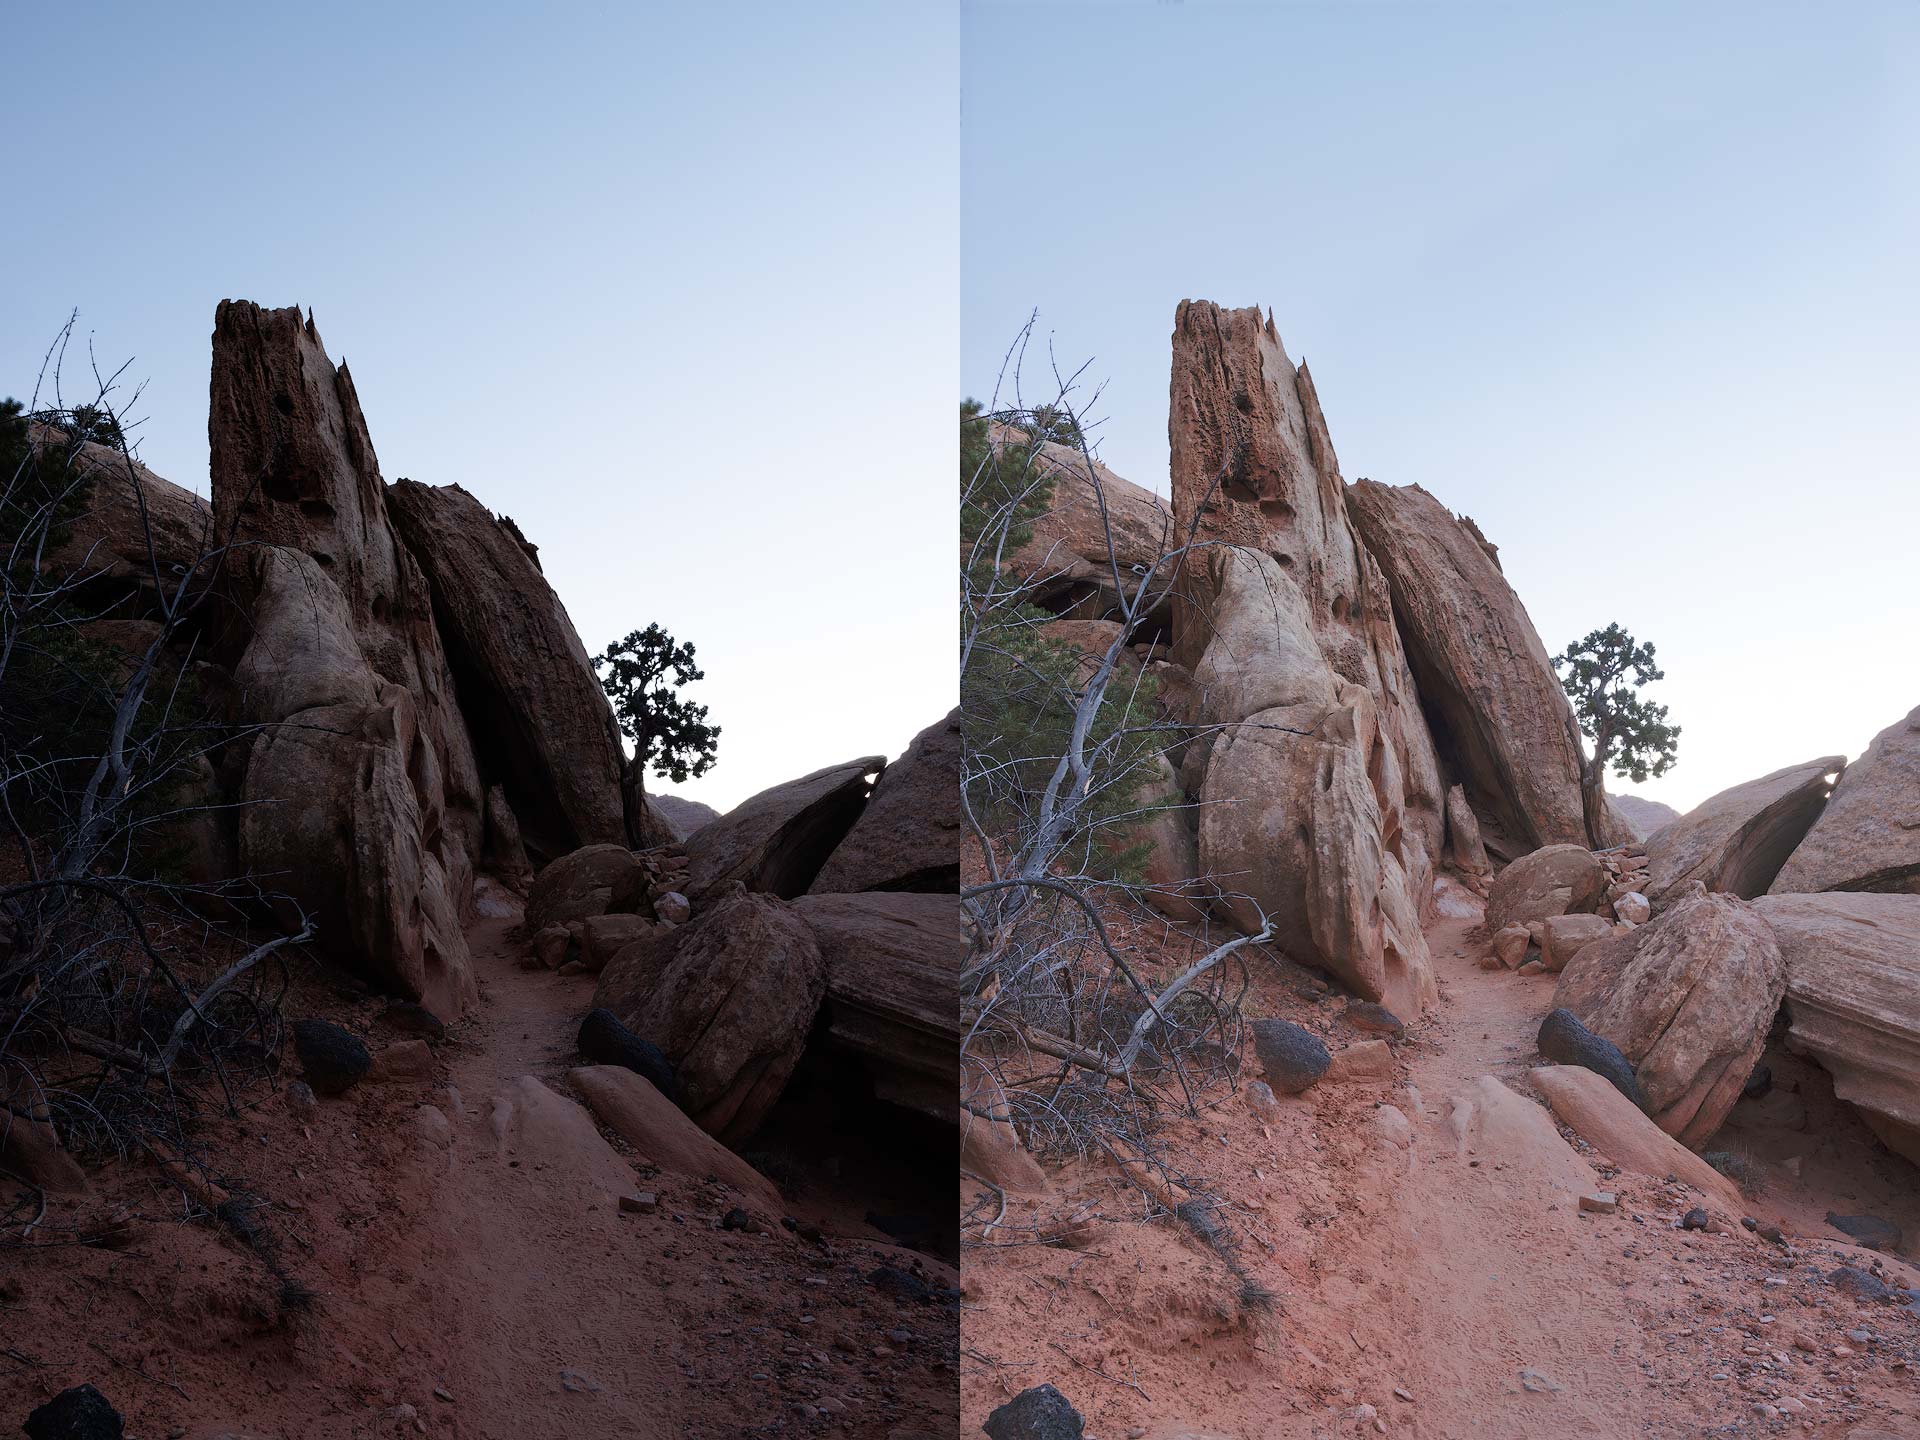 Before and after using Adjust Lighting tool in Topaz Labs Photo AI